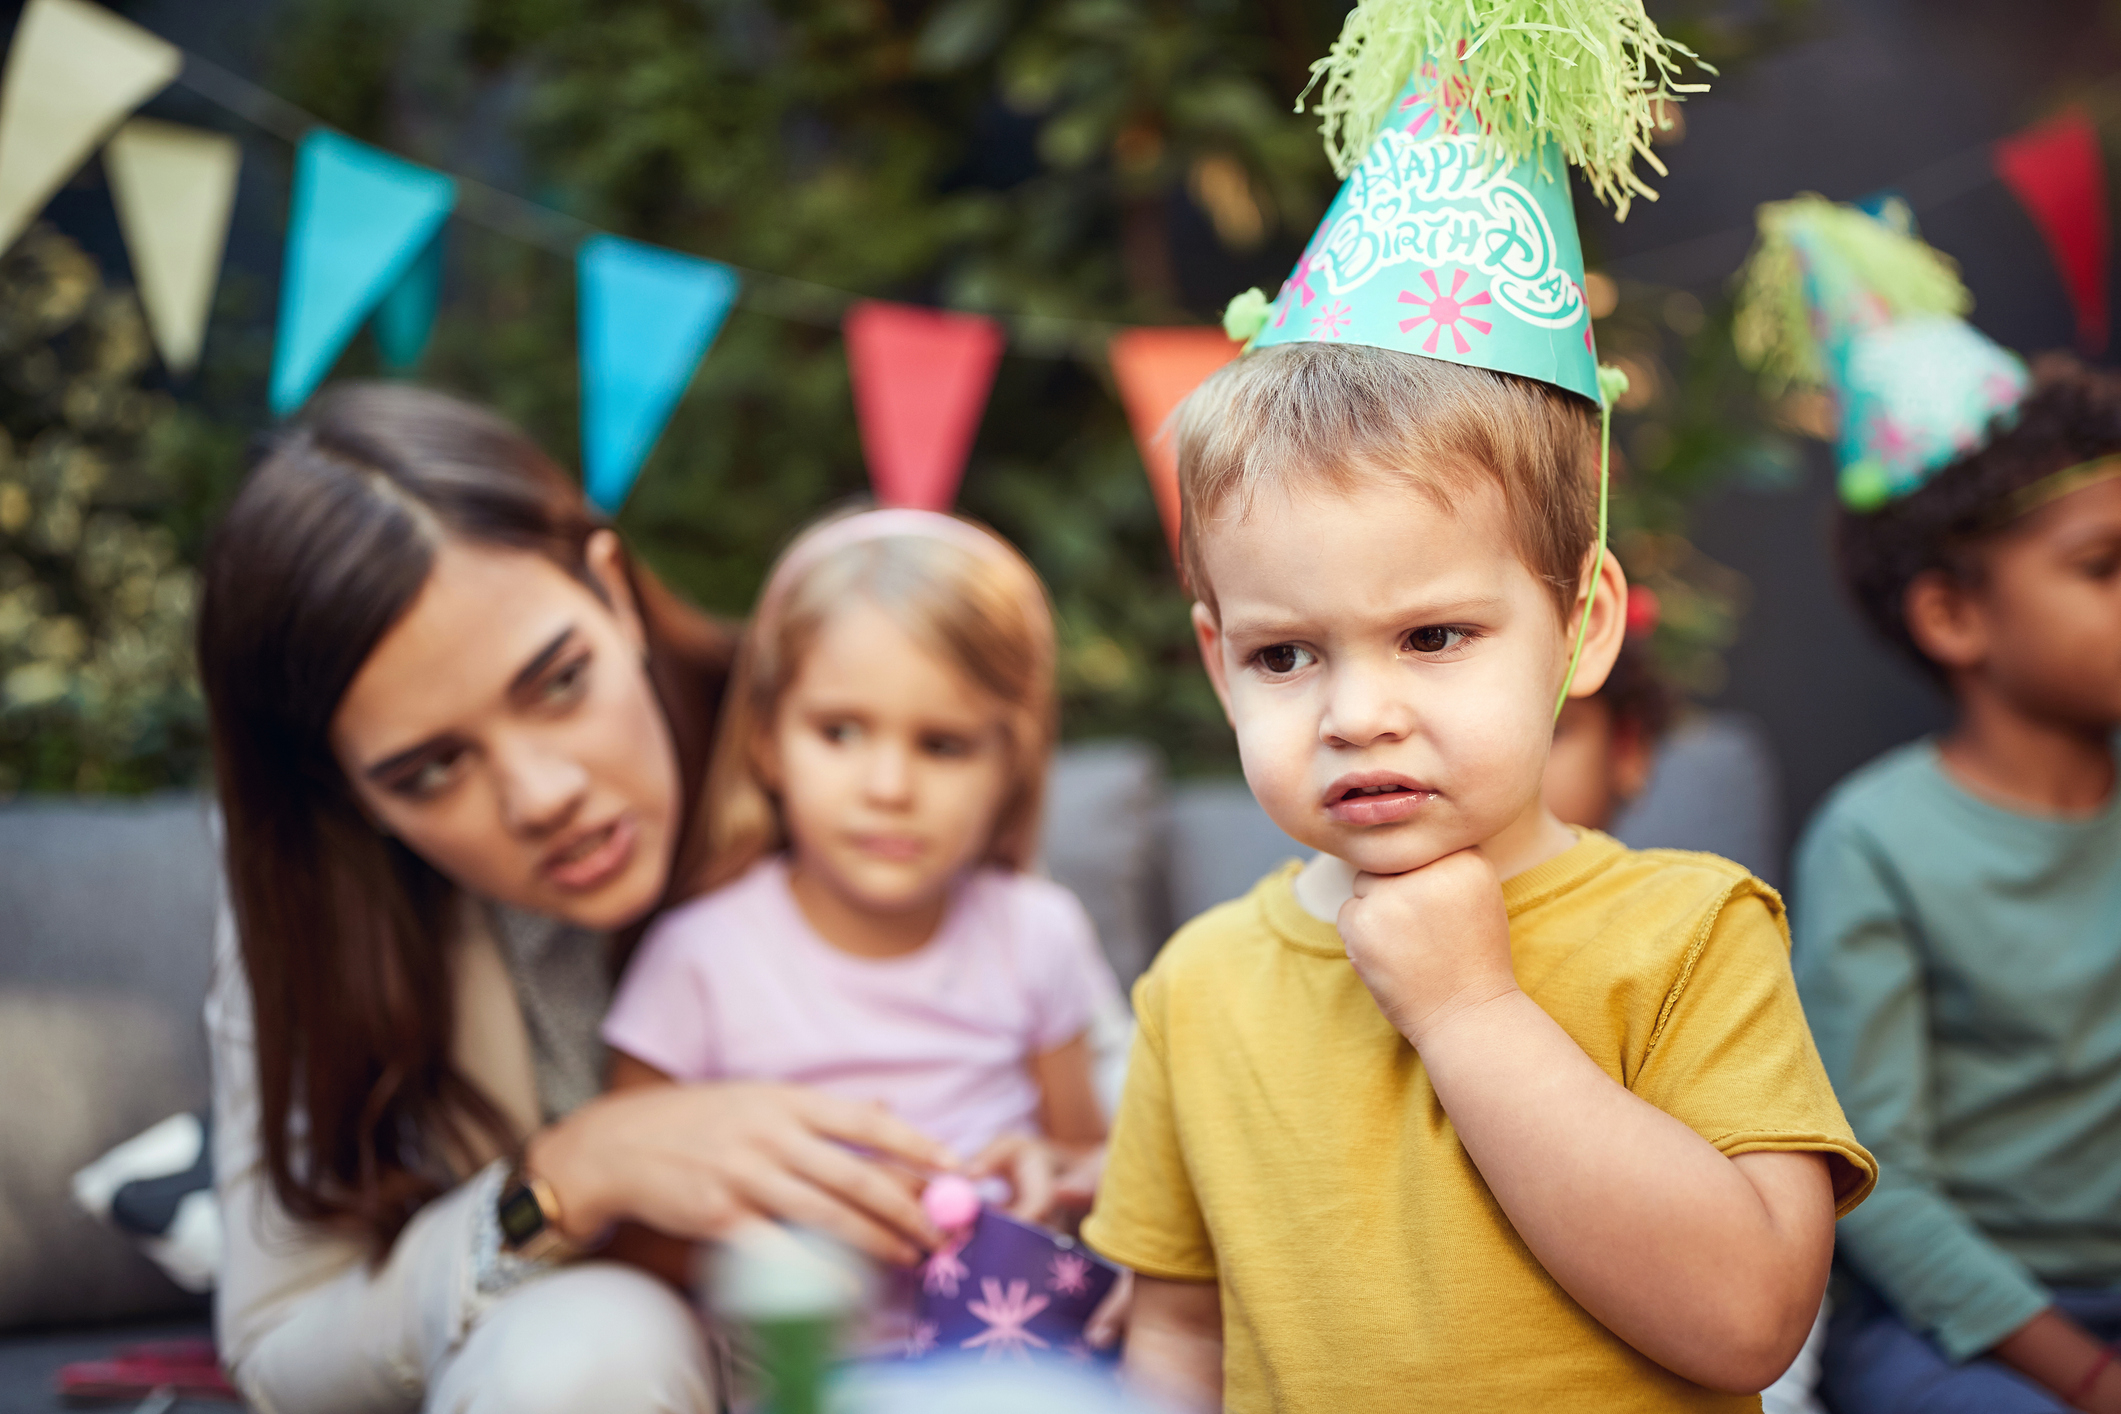 A young kid looking unhappy at a birthday party